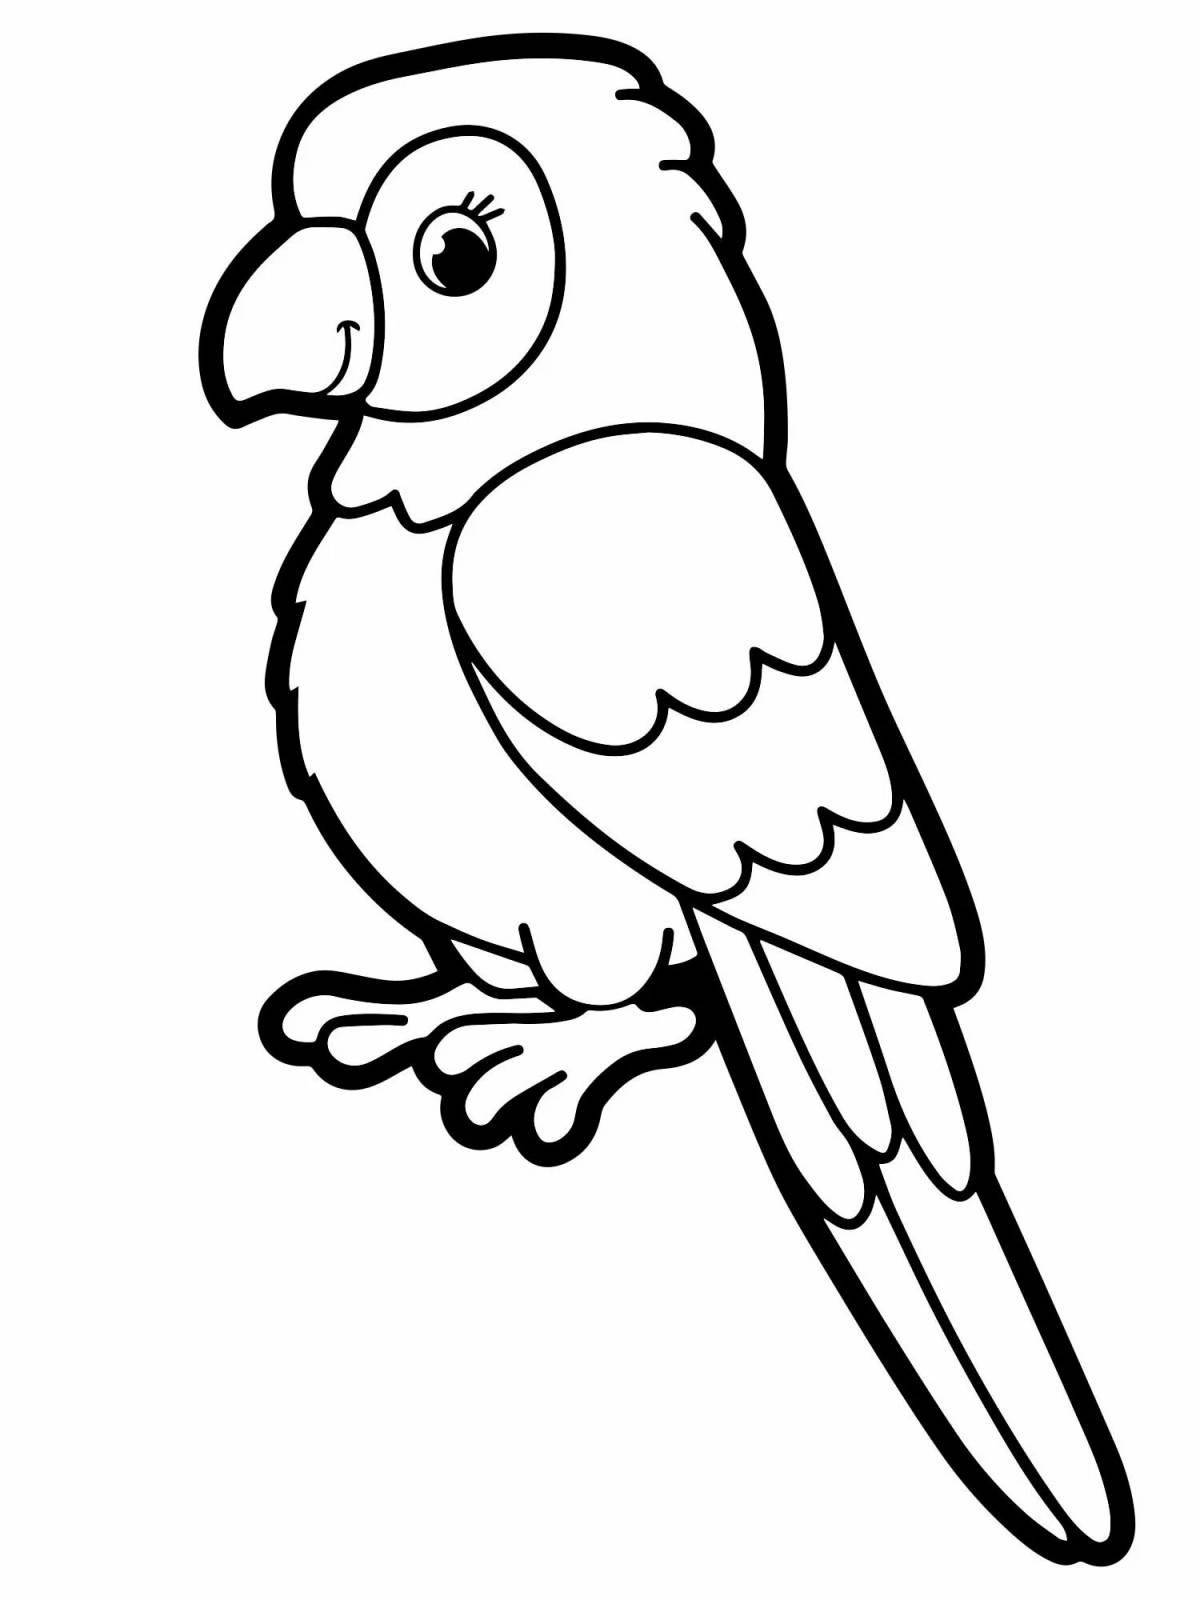 Fancy drawing of a parrot for kids